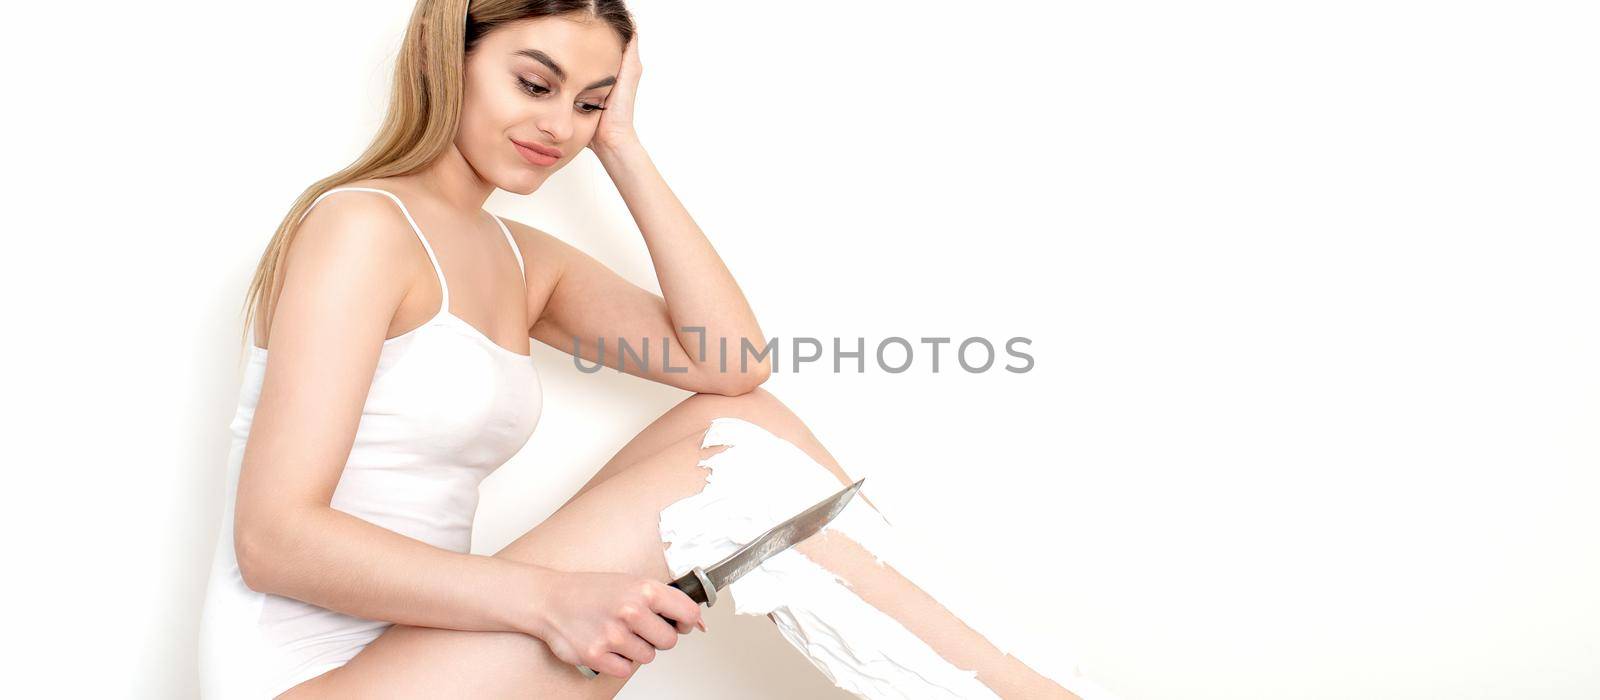 Woman shaves her legs with a knife by okskukuruza